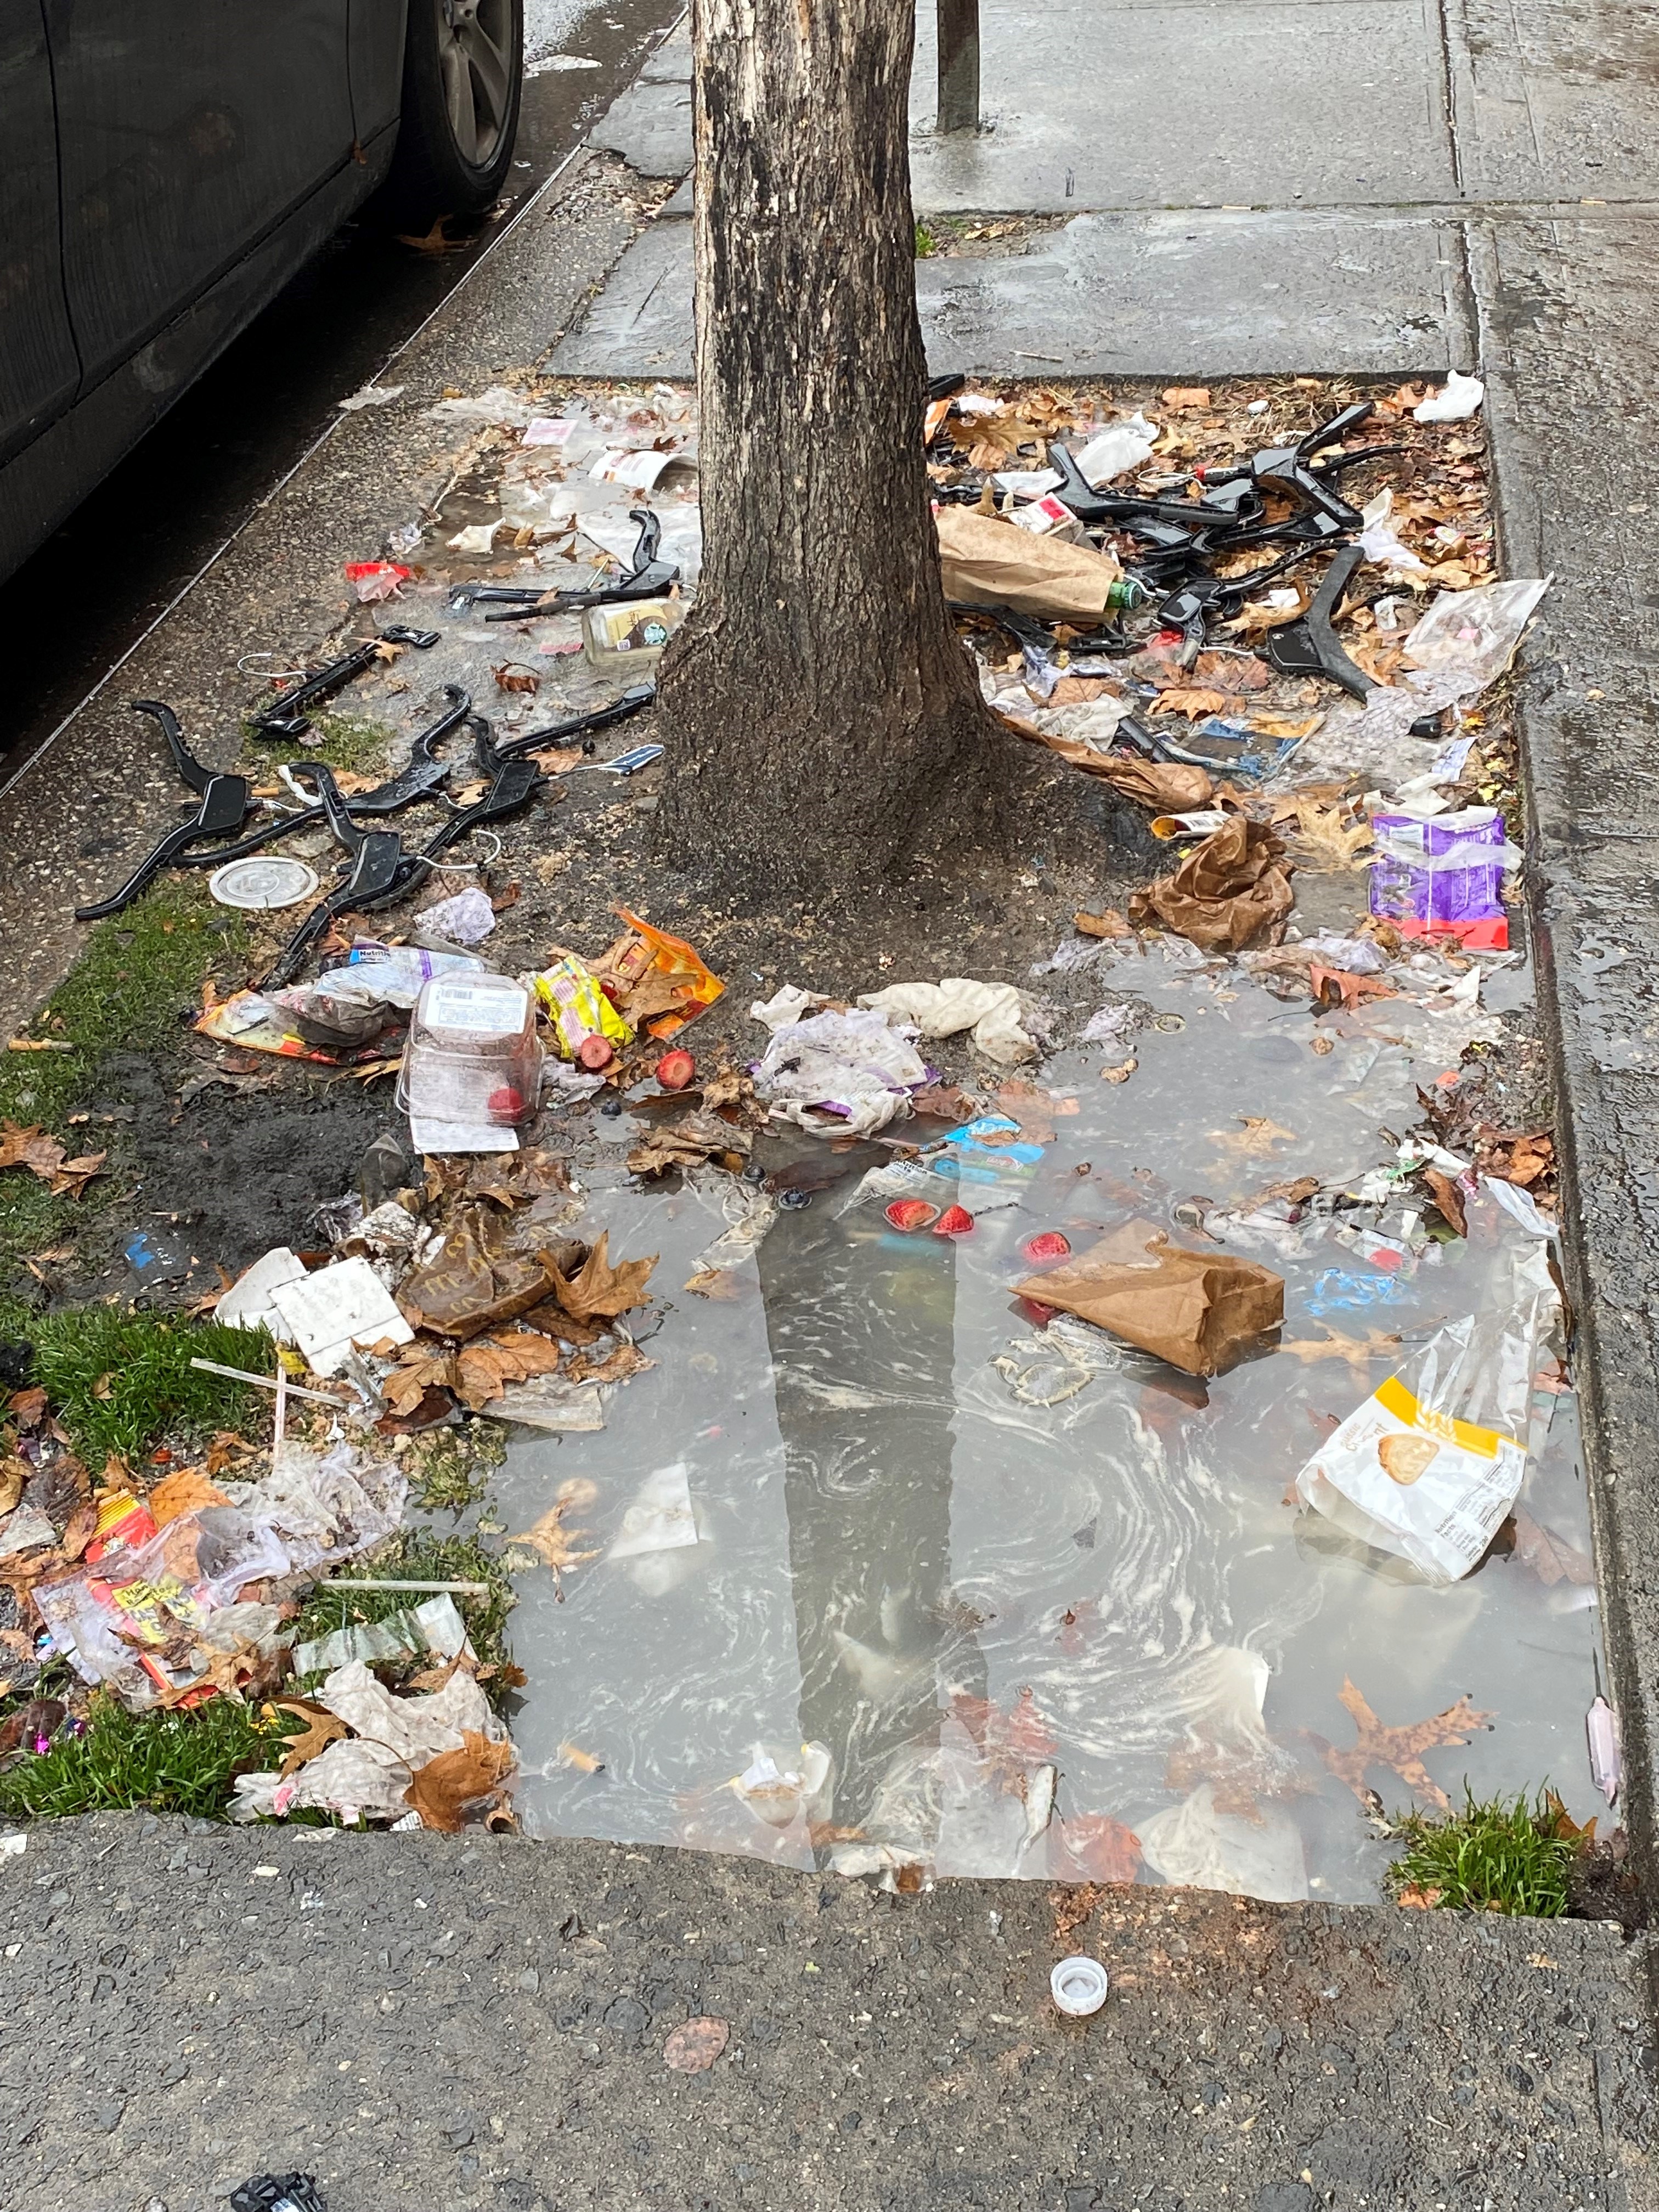 Tree pit on the sidewalk. The pit is filled with water, covered in plastic bags, clothes hangers, paper bags, and other litter. Syringes are also visible in the pit.